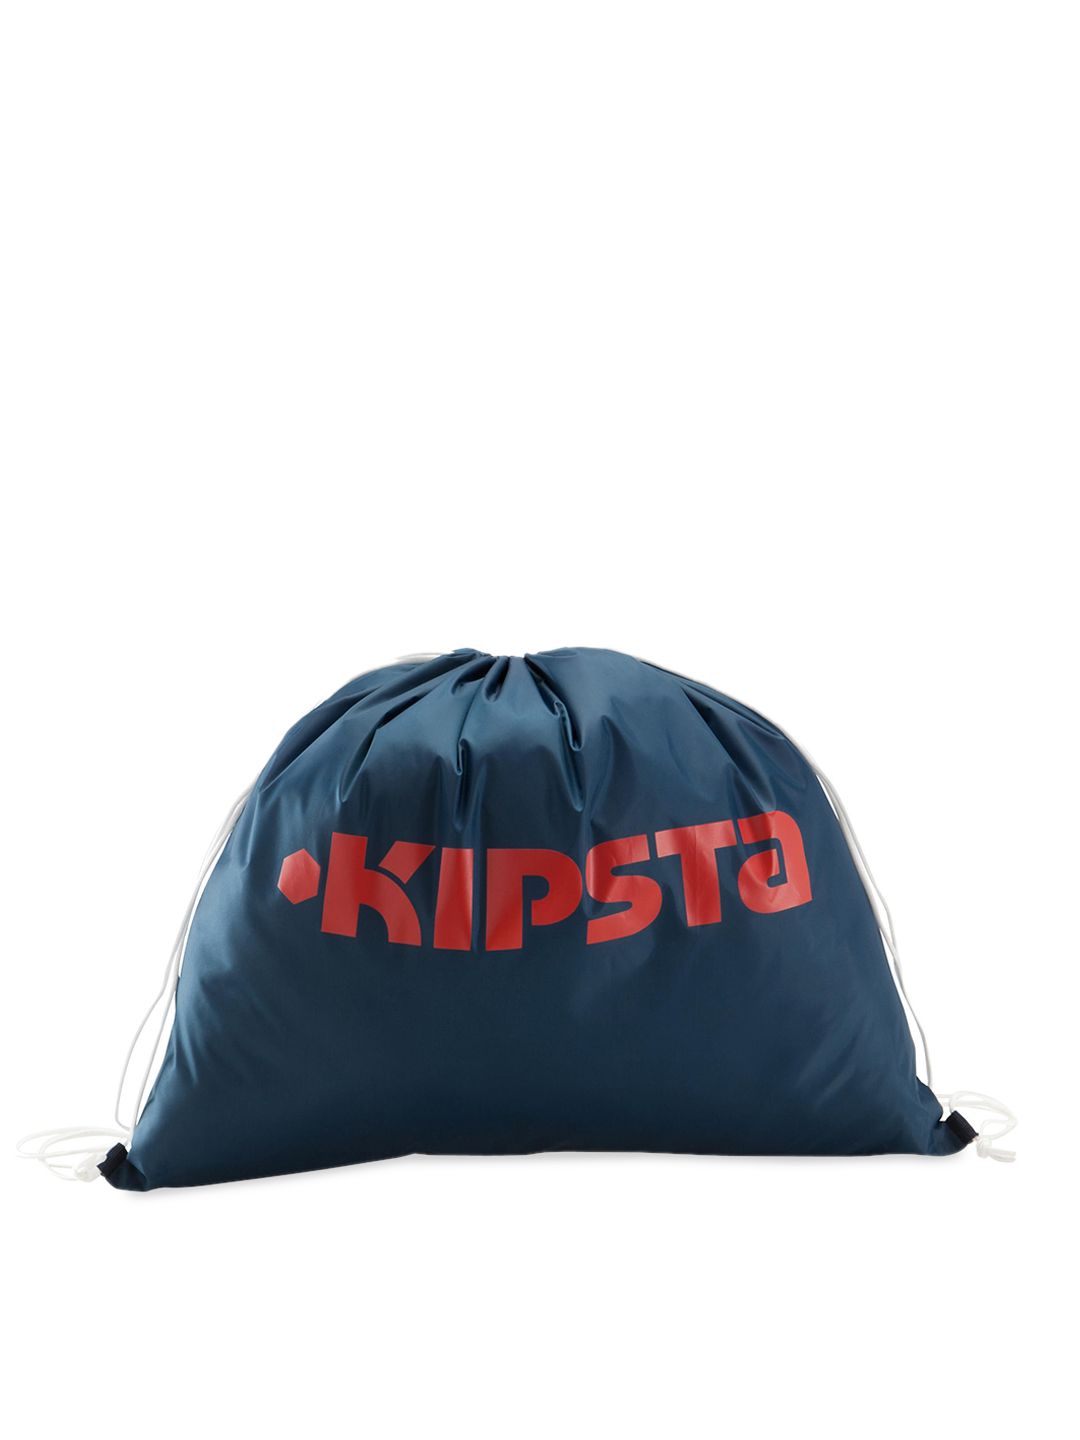 Kipsta By Decathlon Unisex Navy Blue & Red Brand Logo Sports Backpack Price in India